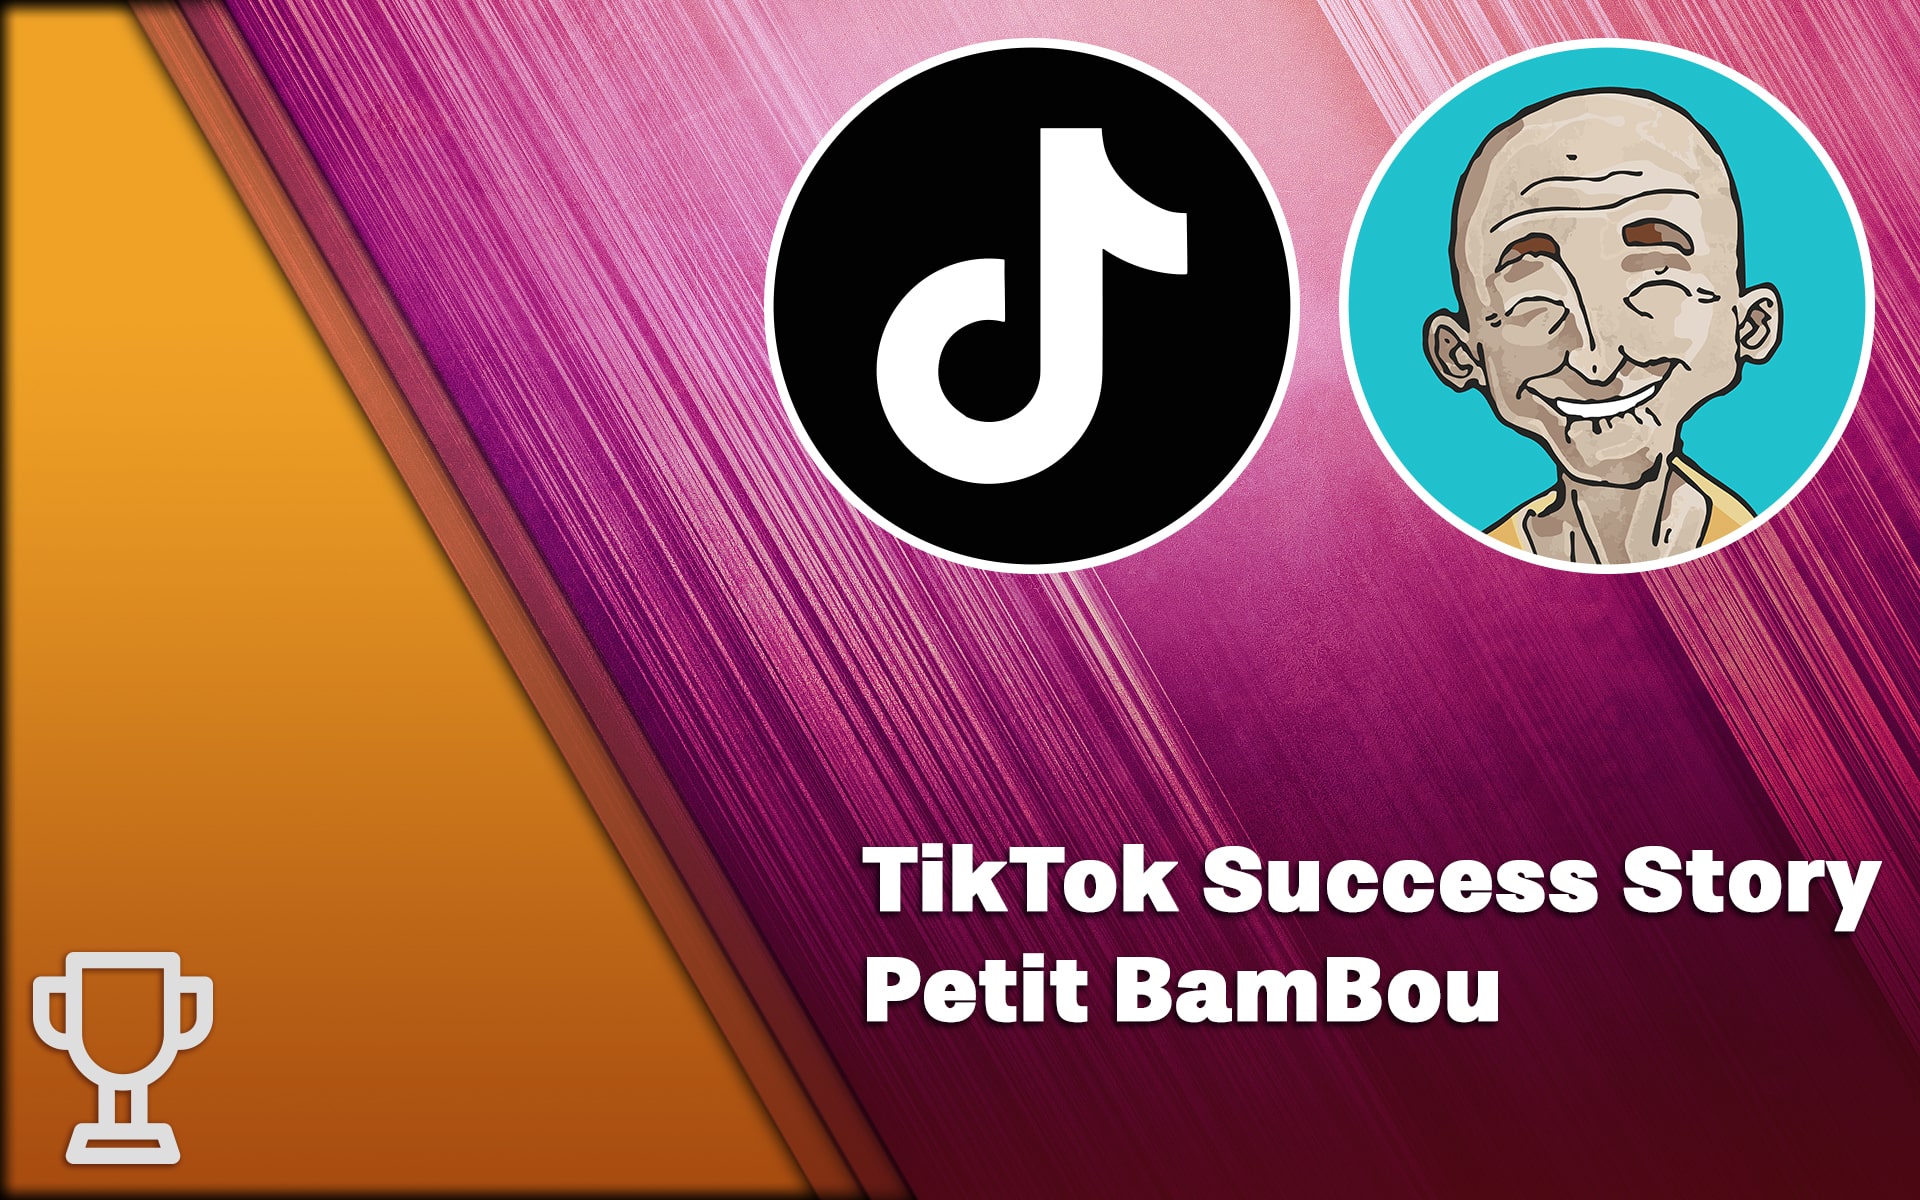 Driving app installs for well-being app Petit BamBou